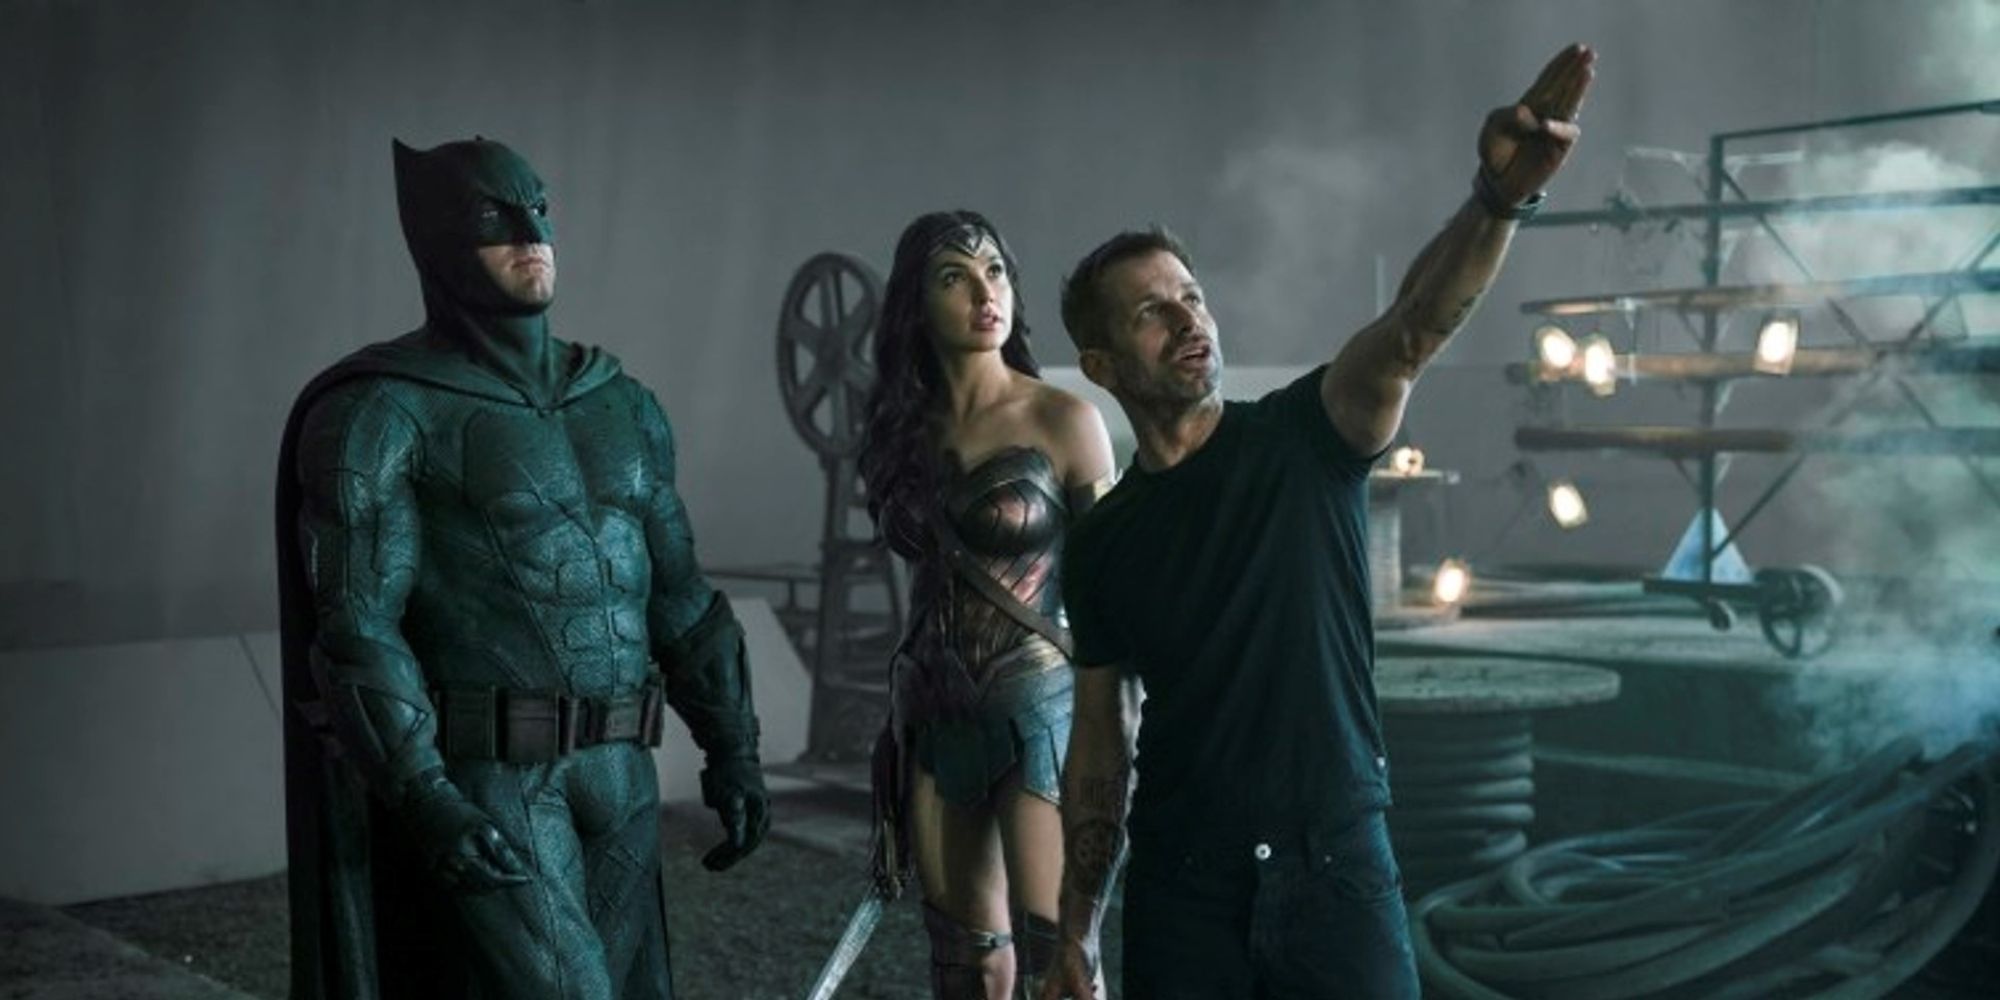 Zack Snyder, Gal Gadot and Ben Affleck standing on the set of Justice League